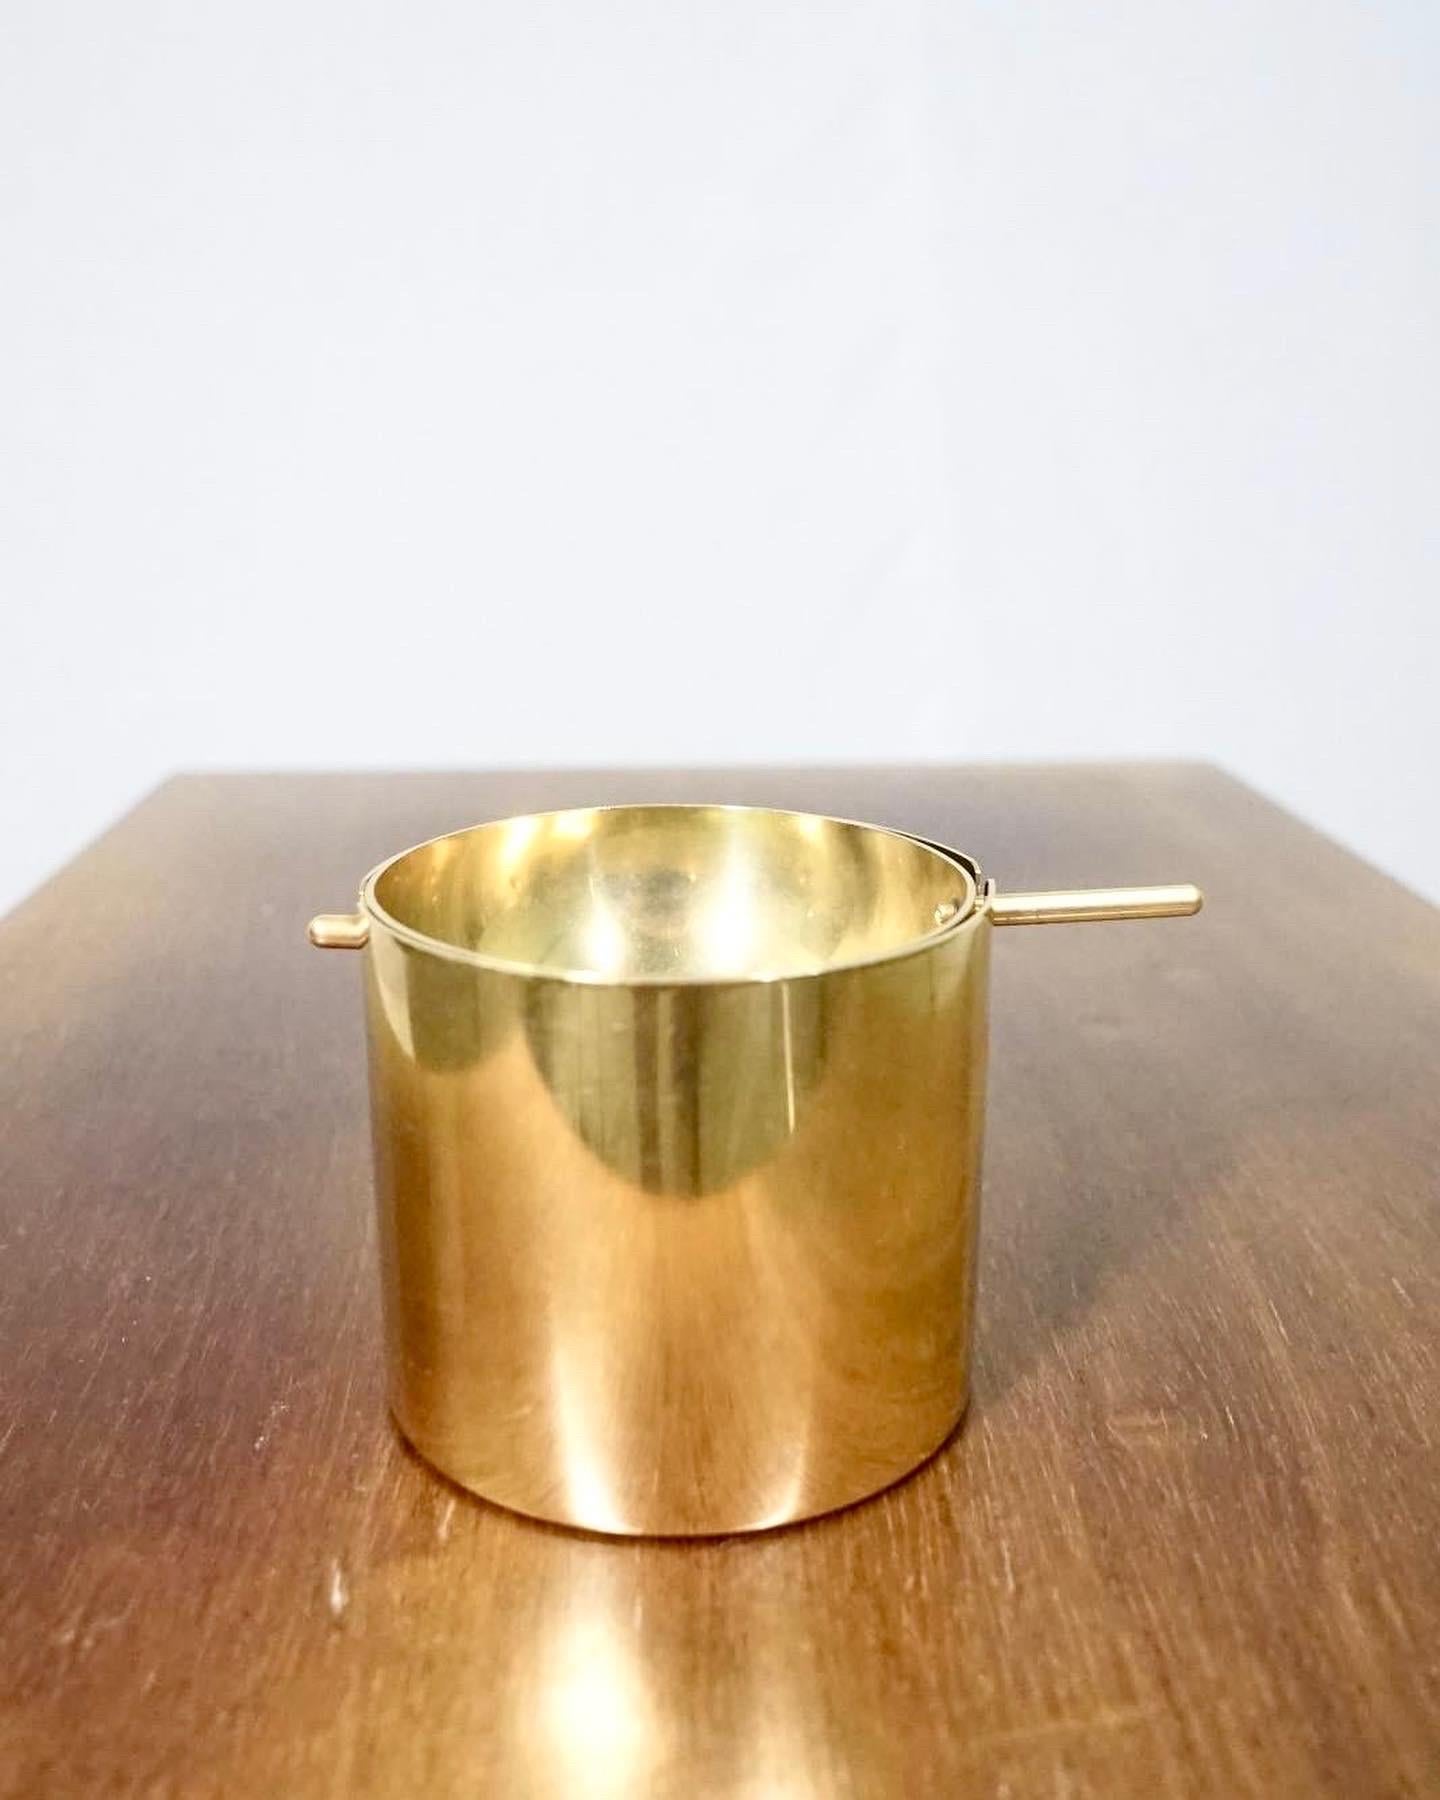 Arne Jacobsen brass ashtray manufactured by Stelton in the 1970’s. This ashtray in brass is often claimed to be made for the Royal hotel which isn’t true, the brass pieces of the stelton Cylindaline was first set in production after Arne Jacobsen’s